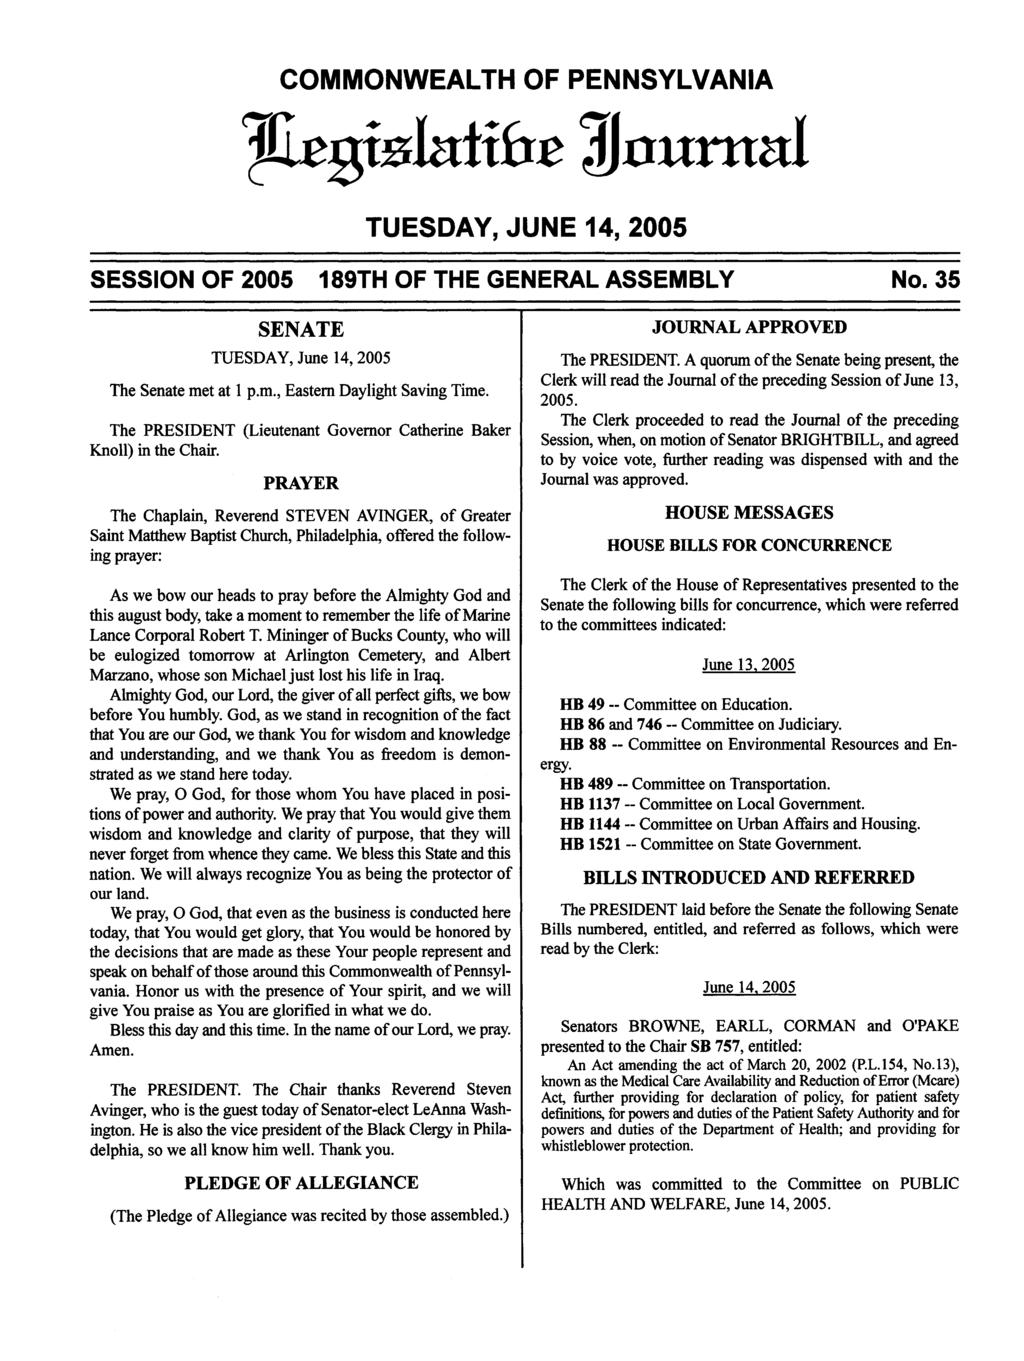 COMMONWEALTH OF PENNSYLVANIA ^tqx&hxixbt 31numal TUESDAY, JUNE 14, 2005 SESSION OF 2005 189TH OF THE GENERAL ASSEMBLY No. 35 SENATE TUESDAY, June 14, 2005 The Senate met at 1 p.m., Eastern Daylight Saving Time.